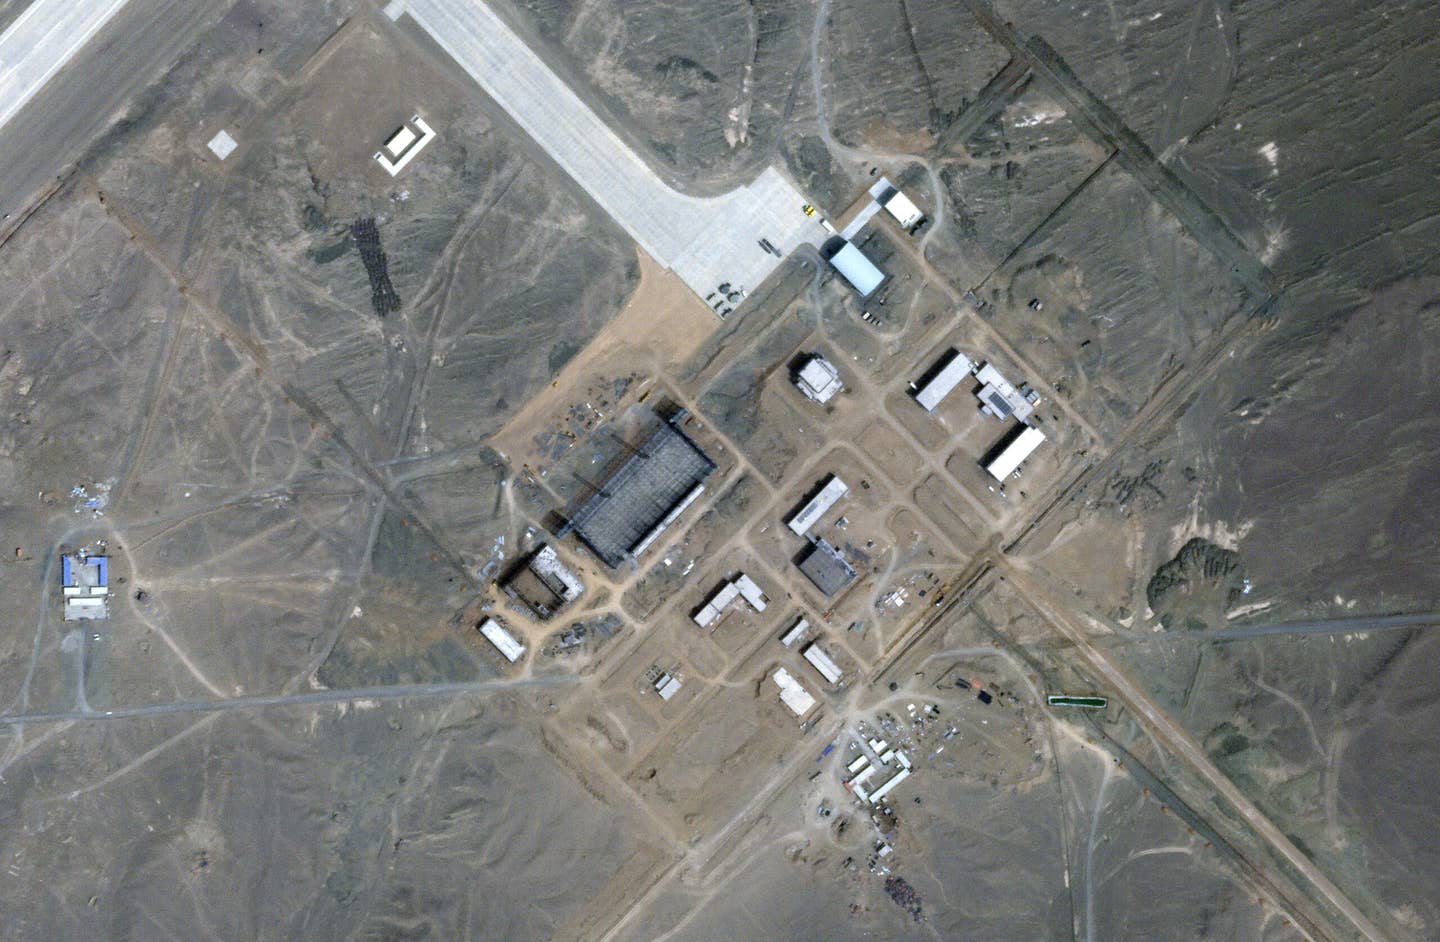 A close-up of construction work at the facility near Lop Nor. <em>PHOTO © 2022 PLANET LABS INC. ALL RIGHTS RESERVED. REPRINTED BY PERMISSION</em>